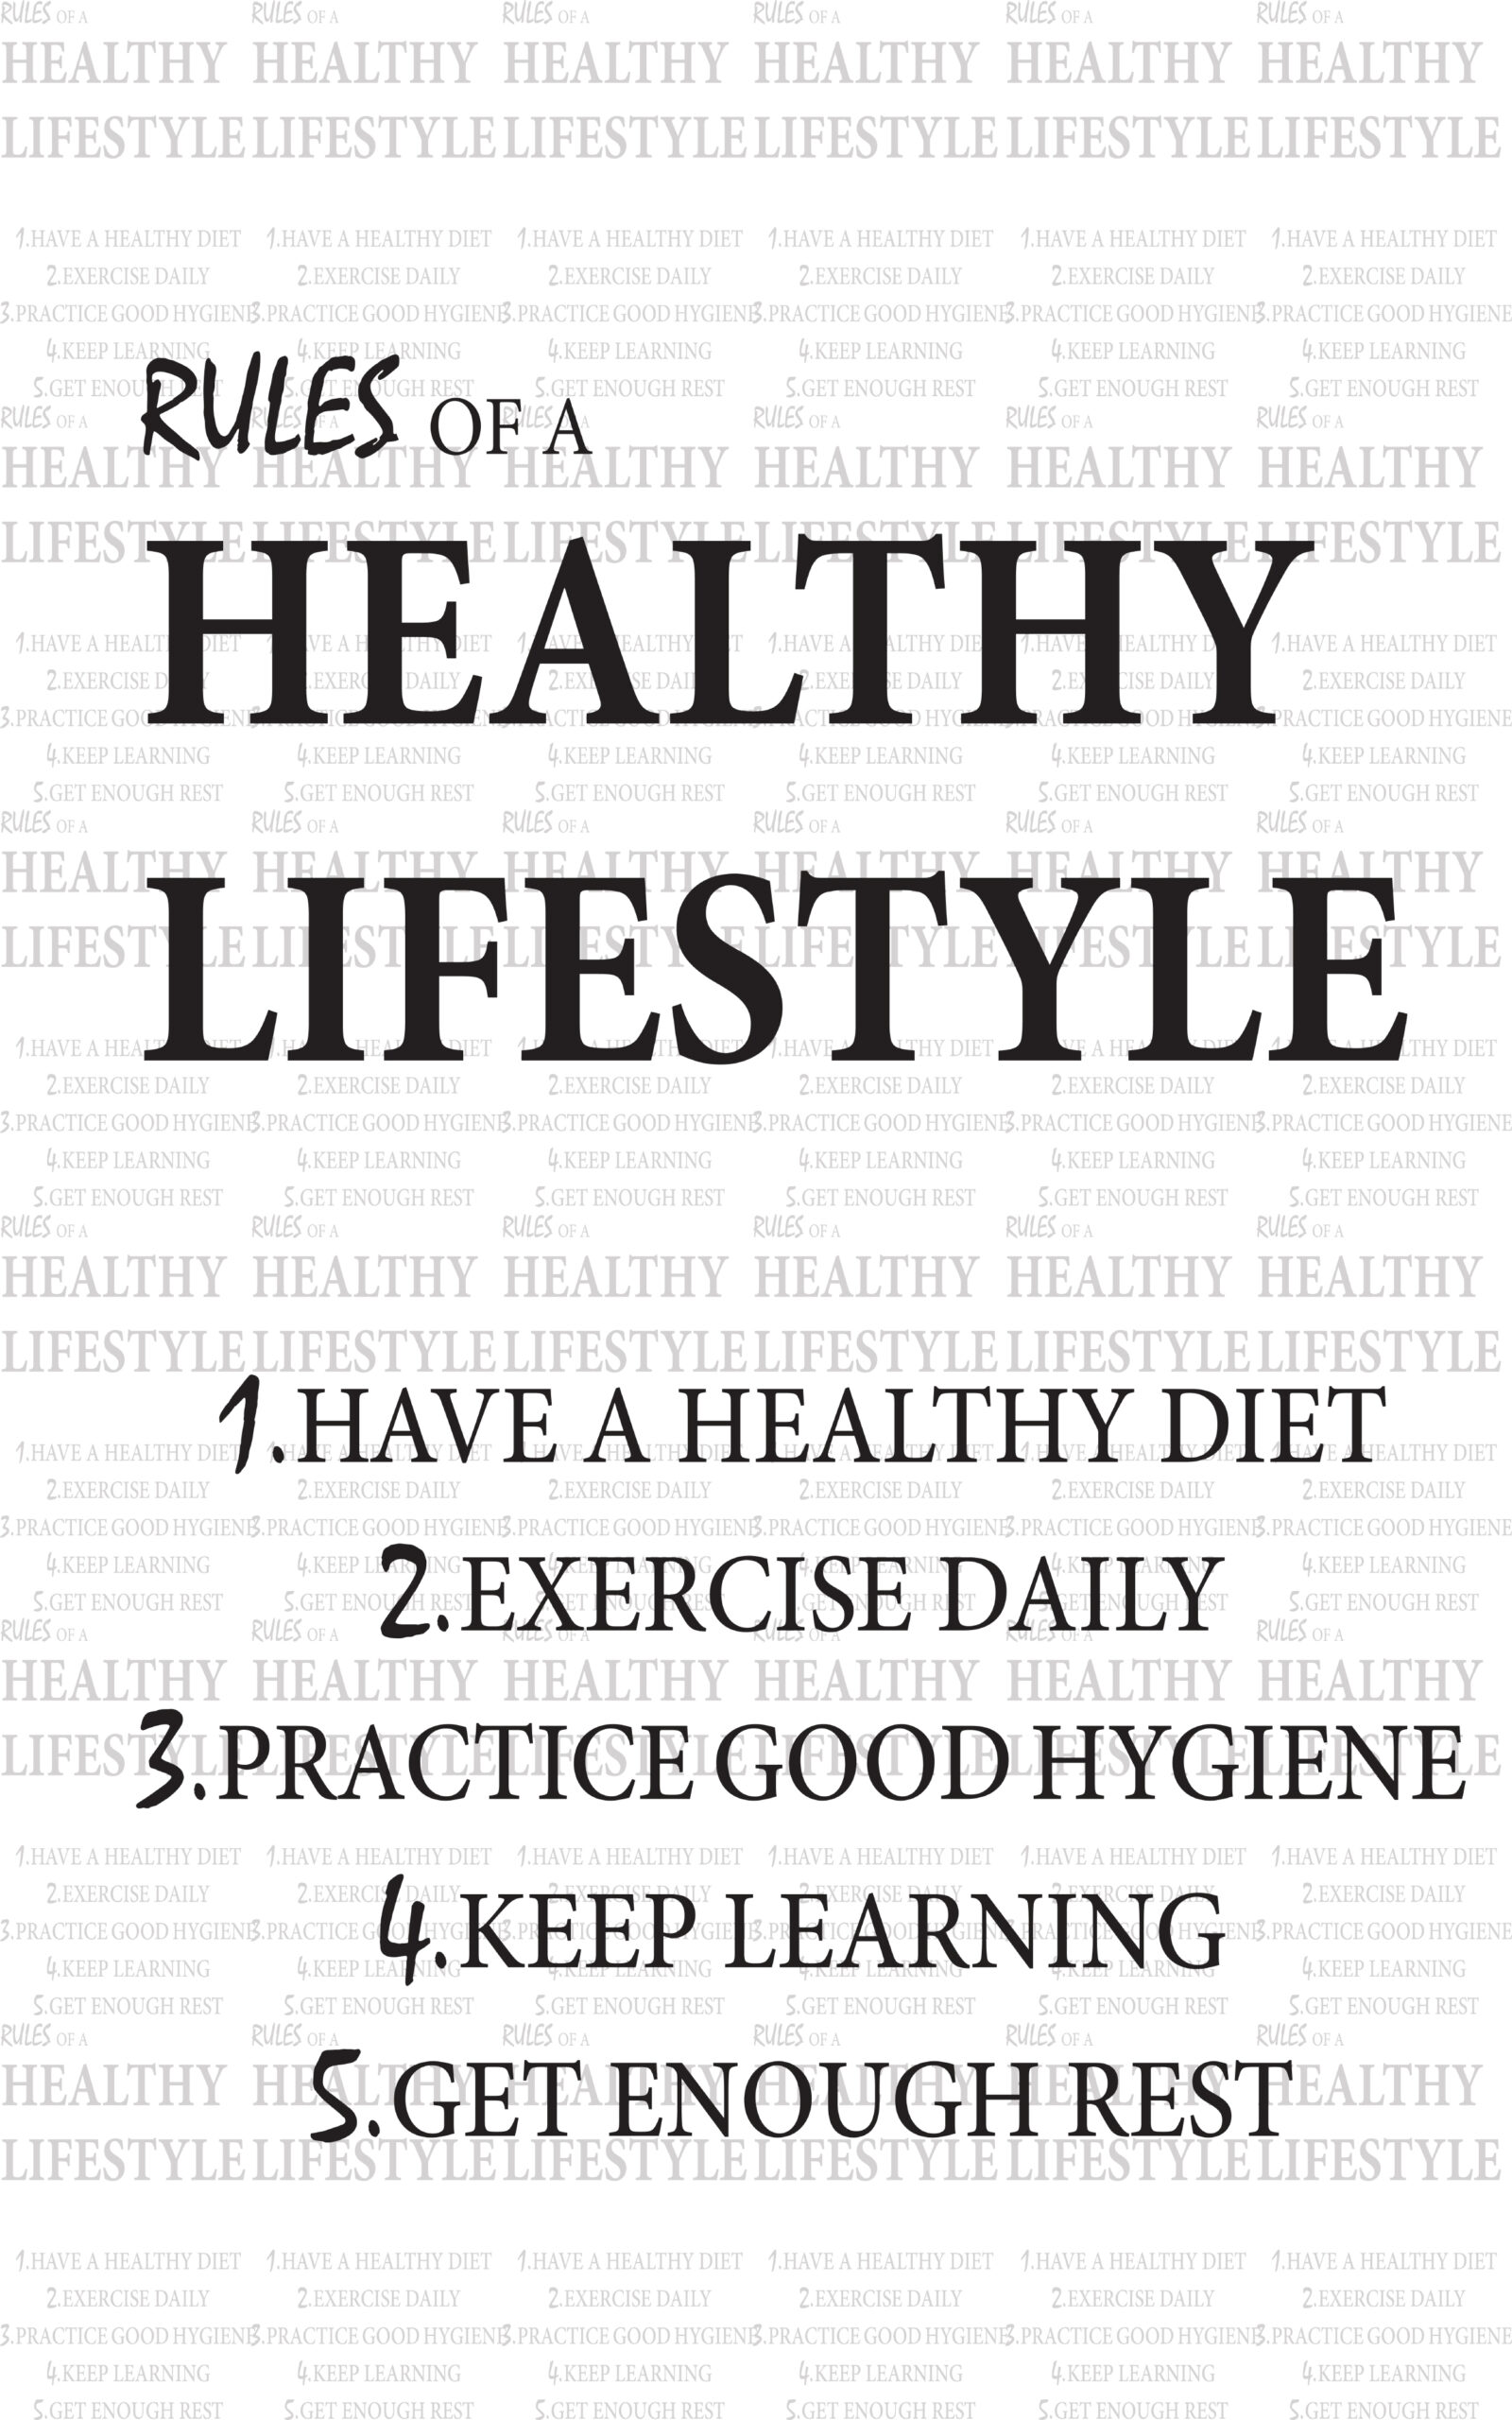 20 Simple Rules For A Healthy Lifestyle